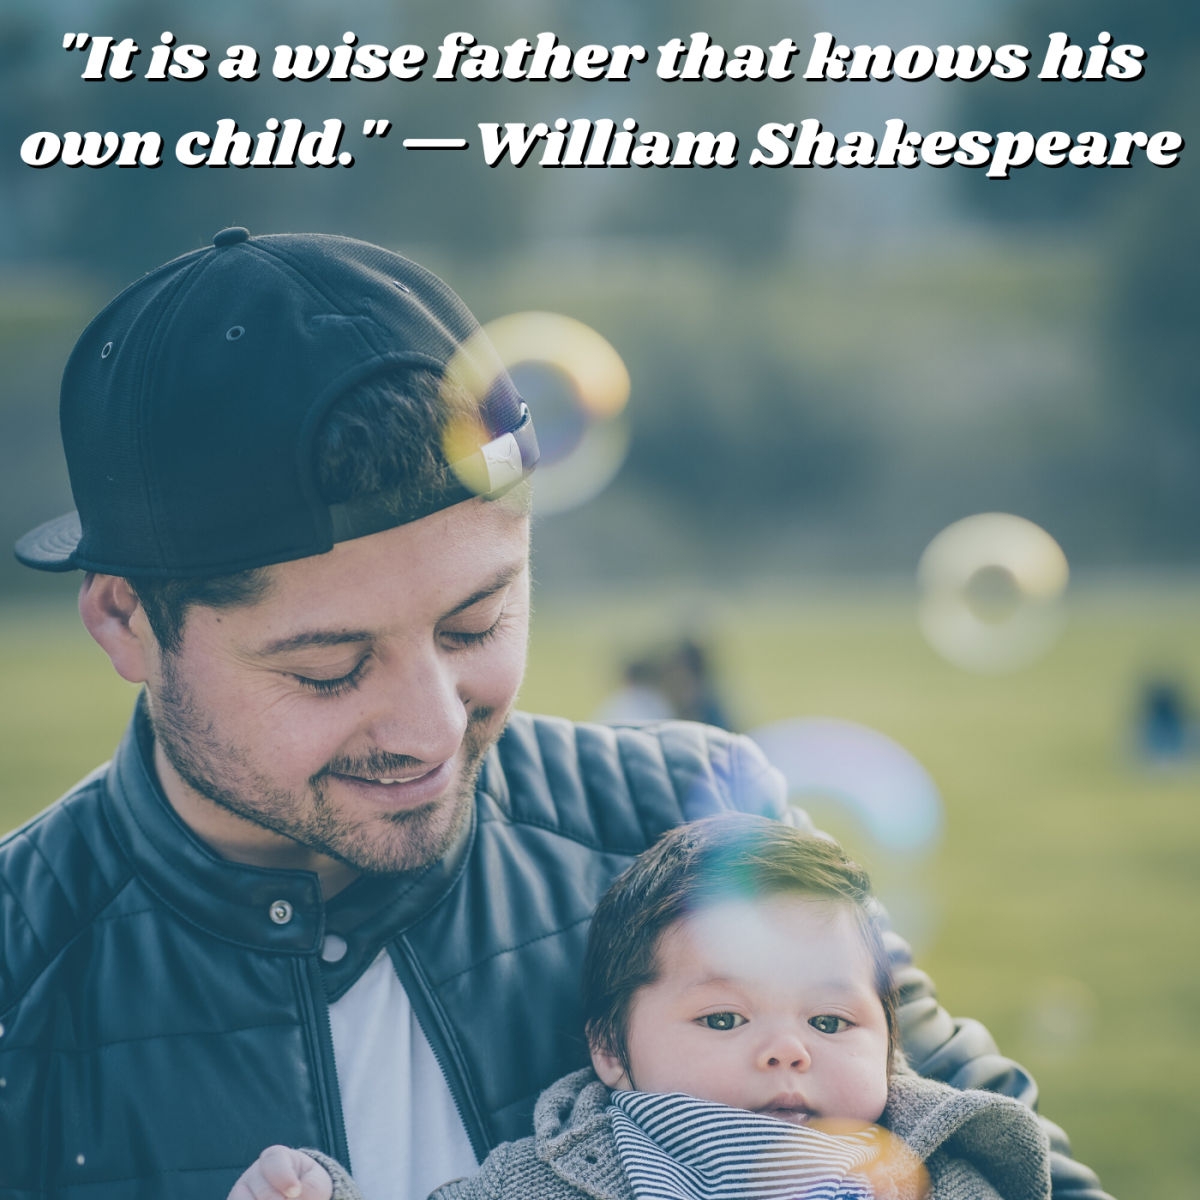 "It is a wise father that knows his own child." —William Shakespeare